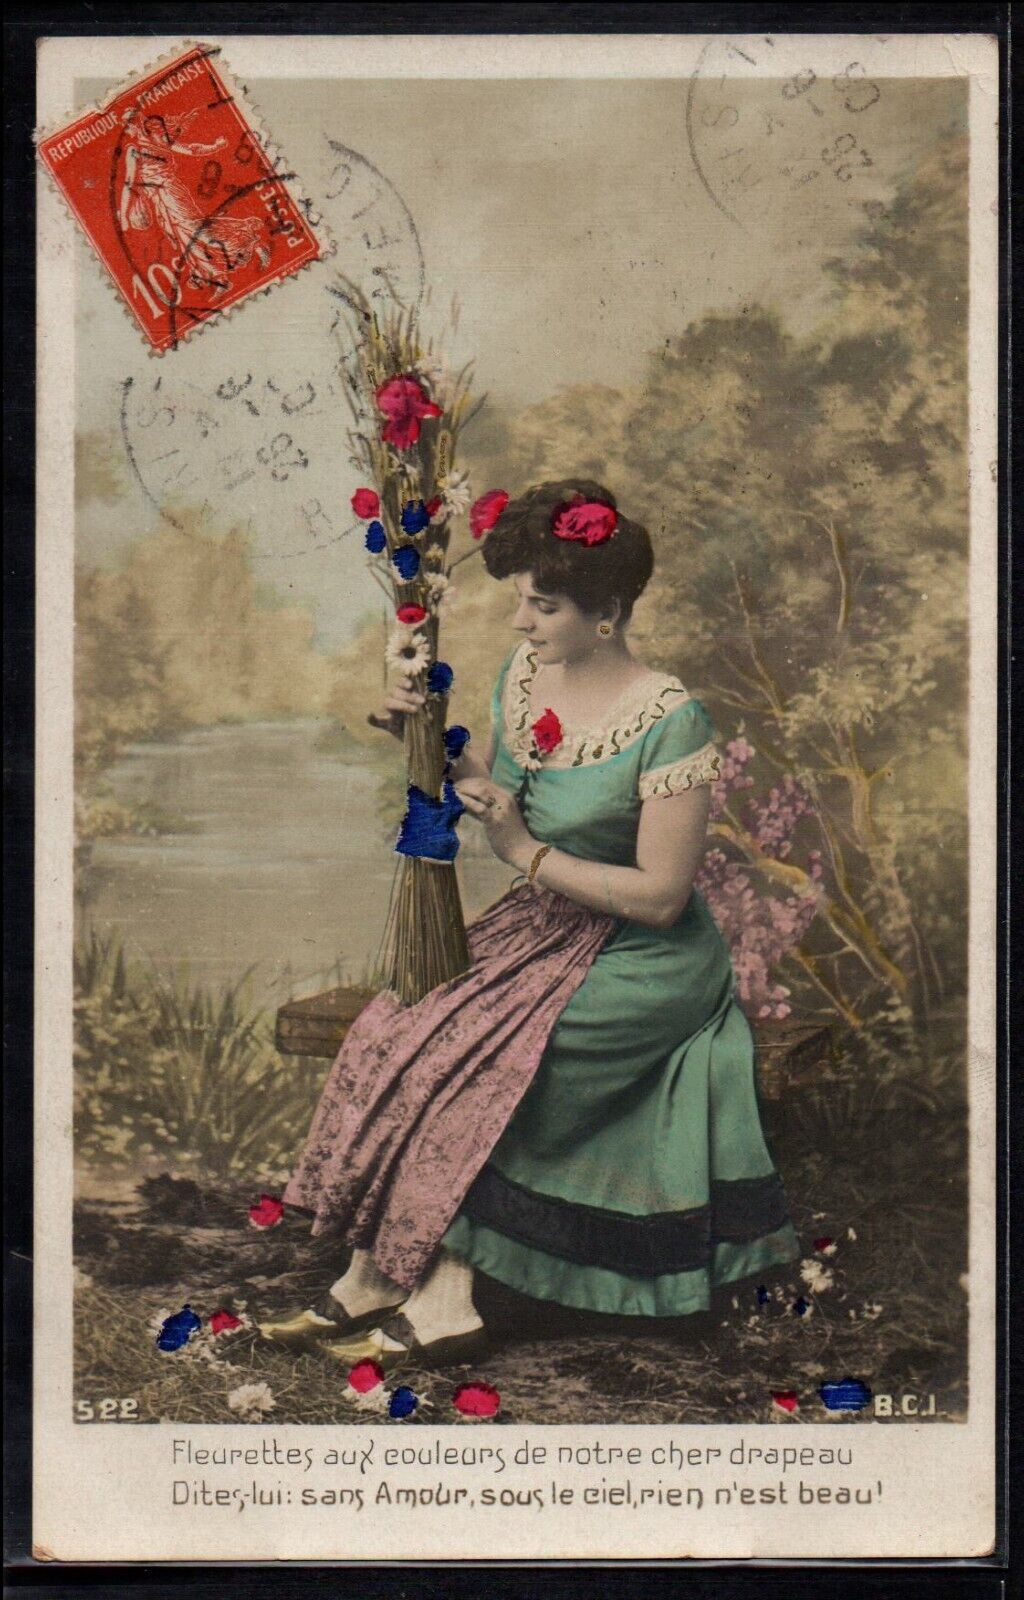 BT042 BEAUTIFUL LADY FLOWERS in the COLORS of FRENCH FLAG Tinted PHOTO pc 1908